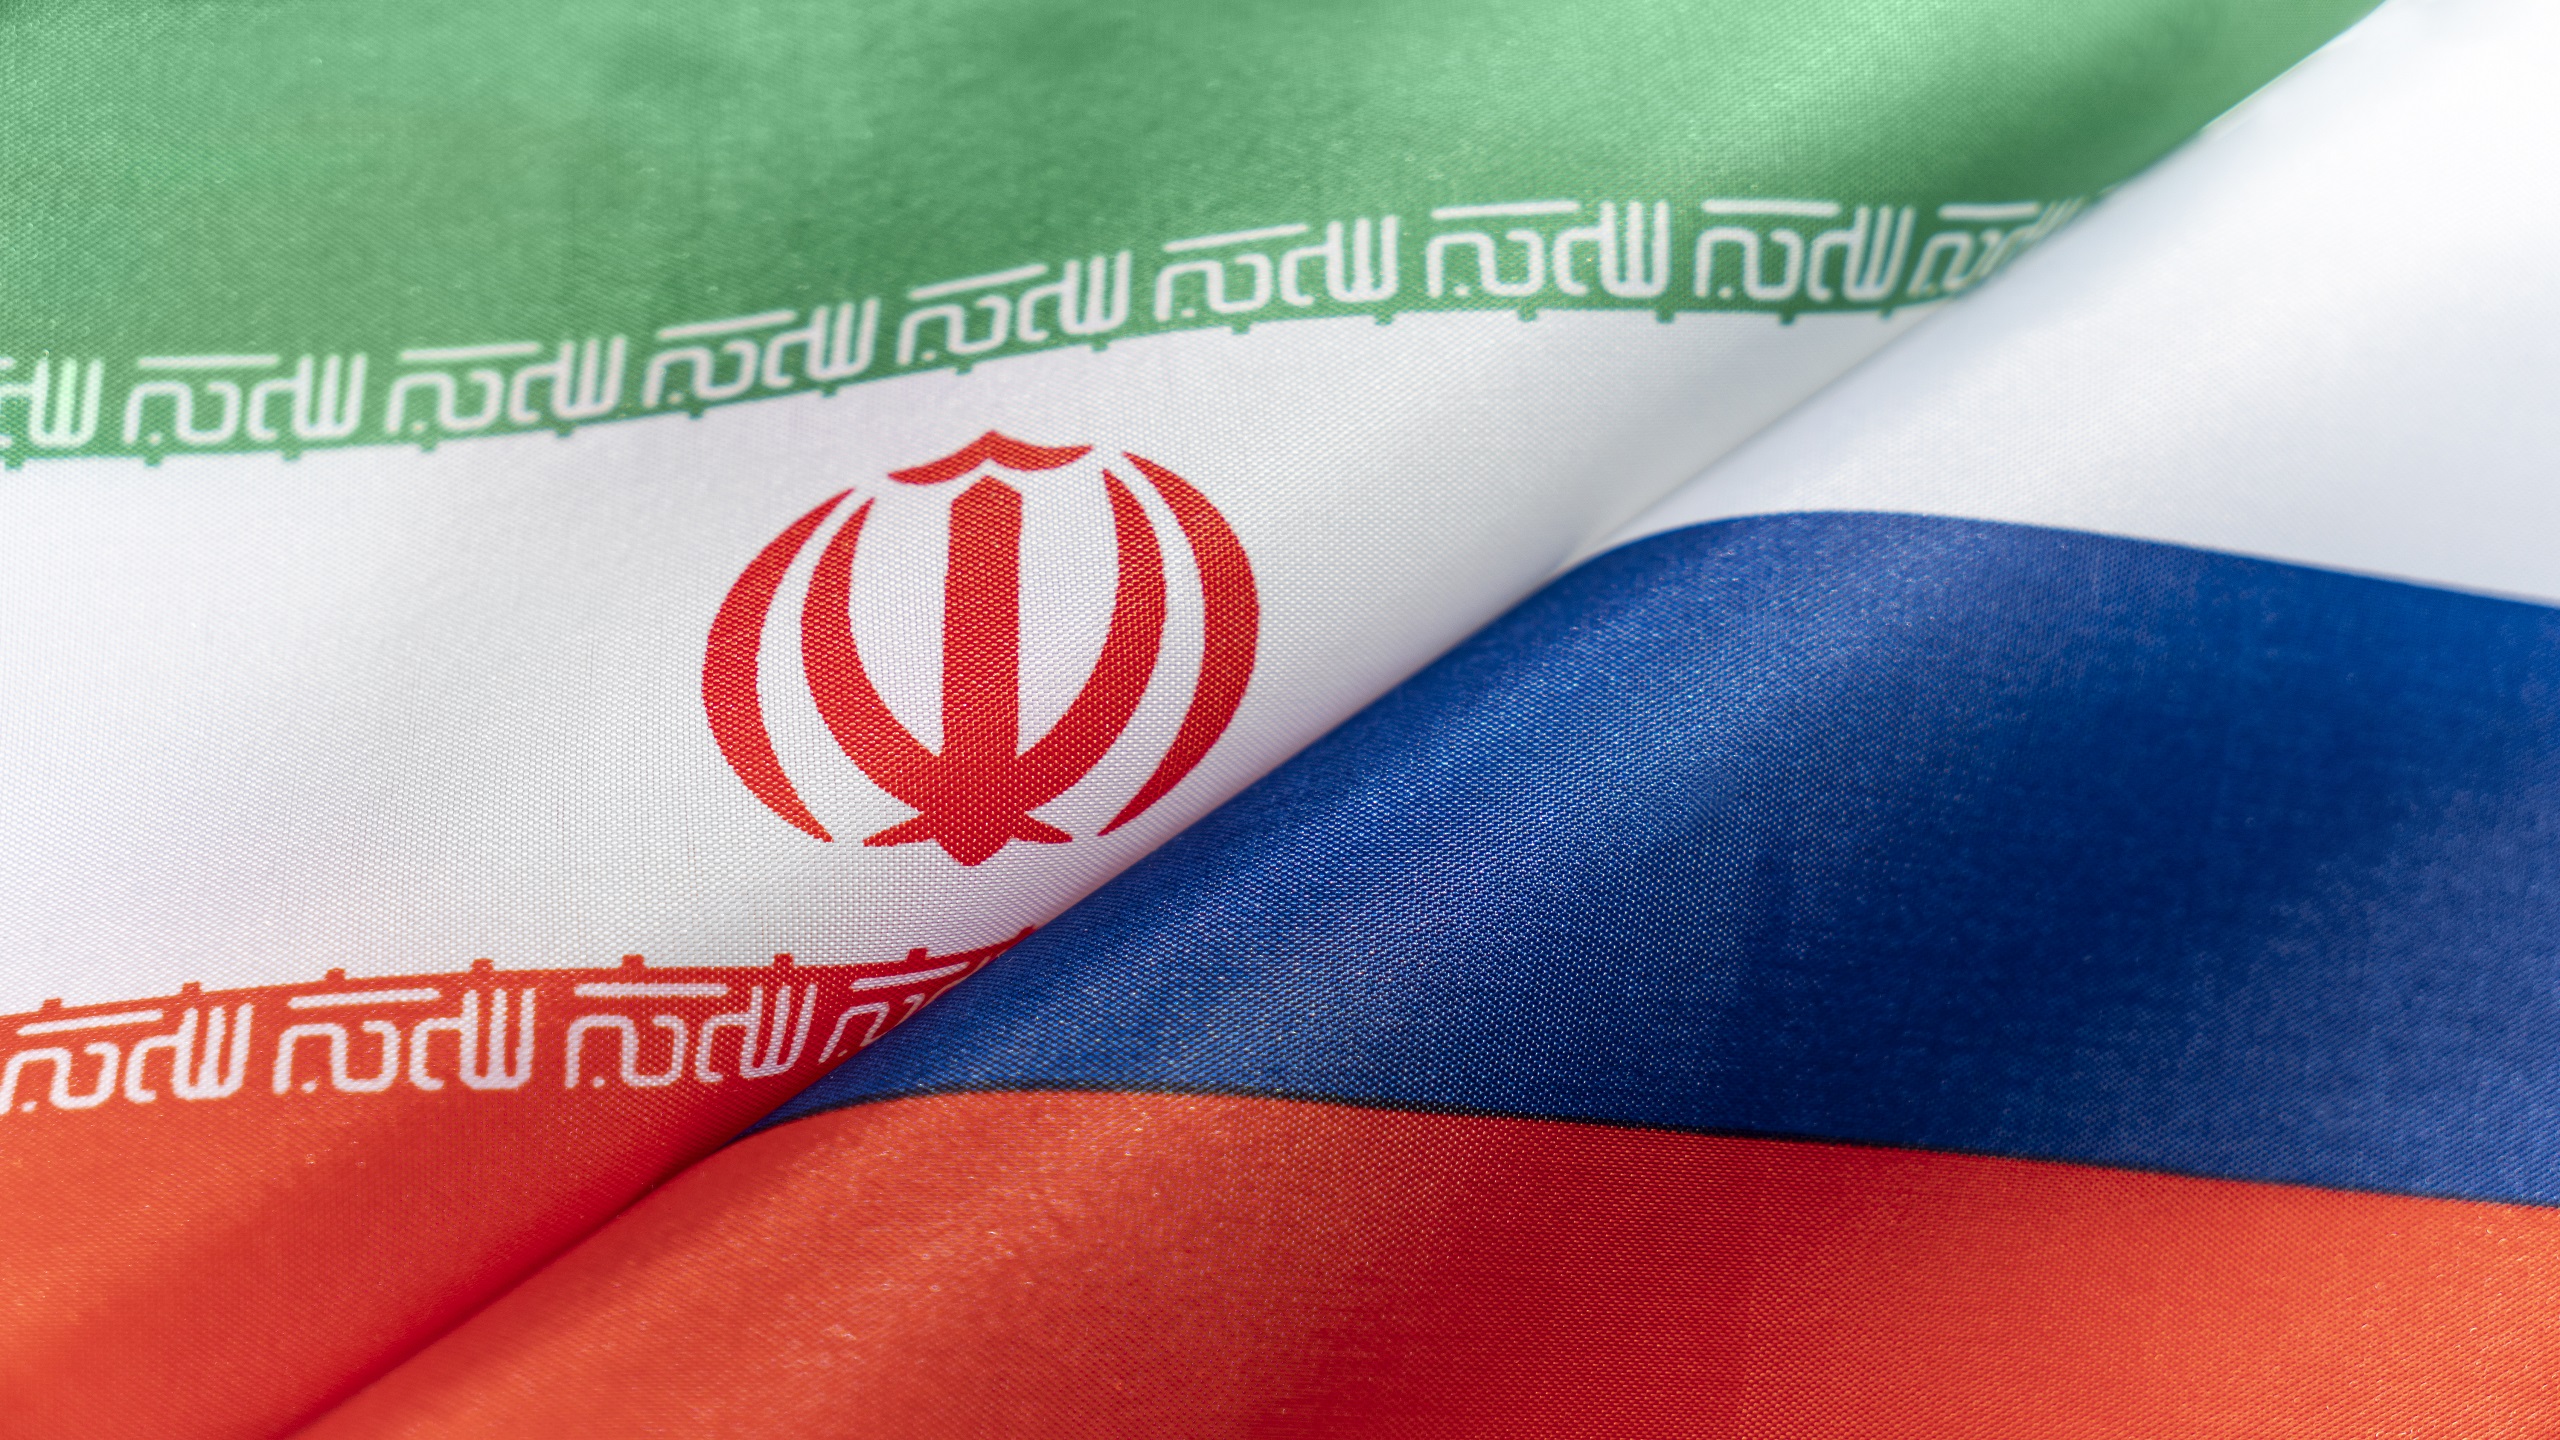 National Currencies Drive Over 60% of Iran-Russia Trade Transactions